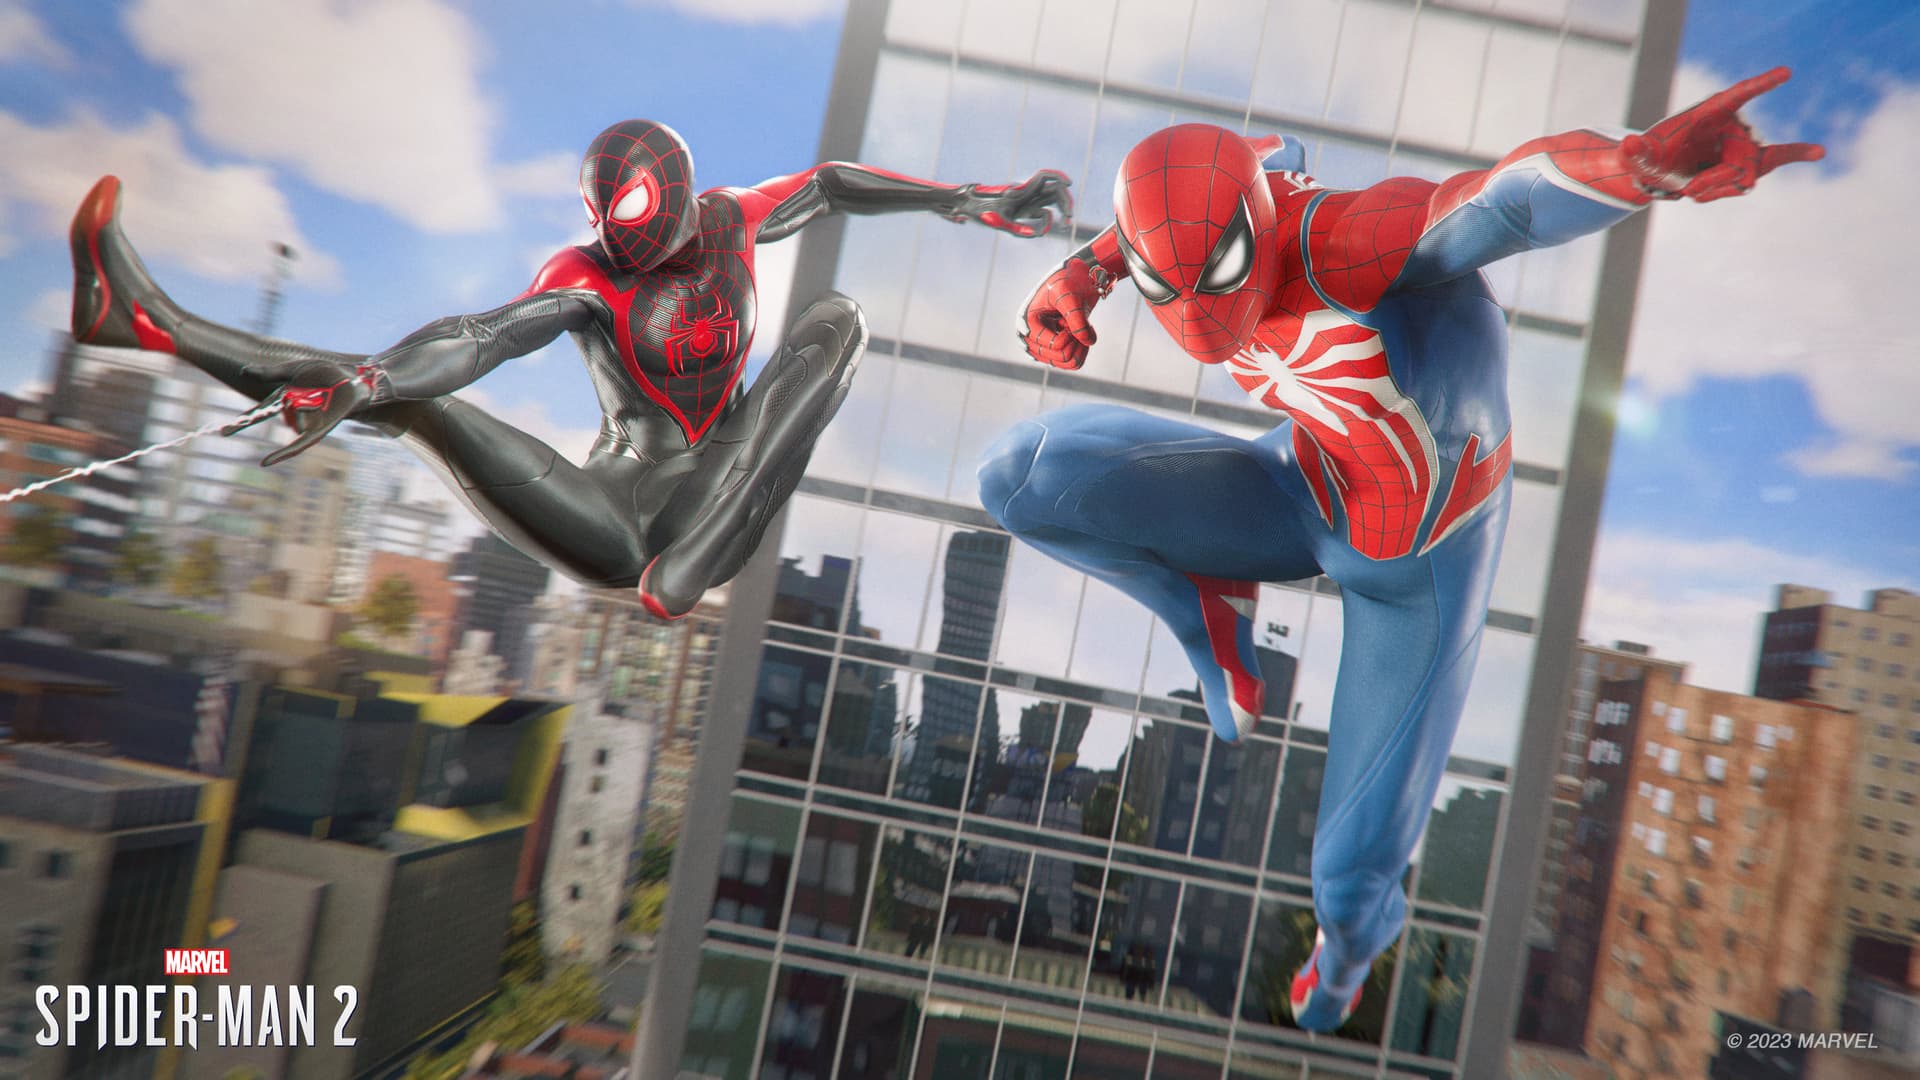 Marvel's Spider-Man 2: Peter Parker and Miles Morales swing across Marvel's New York